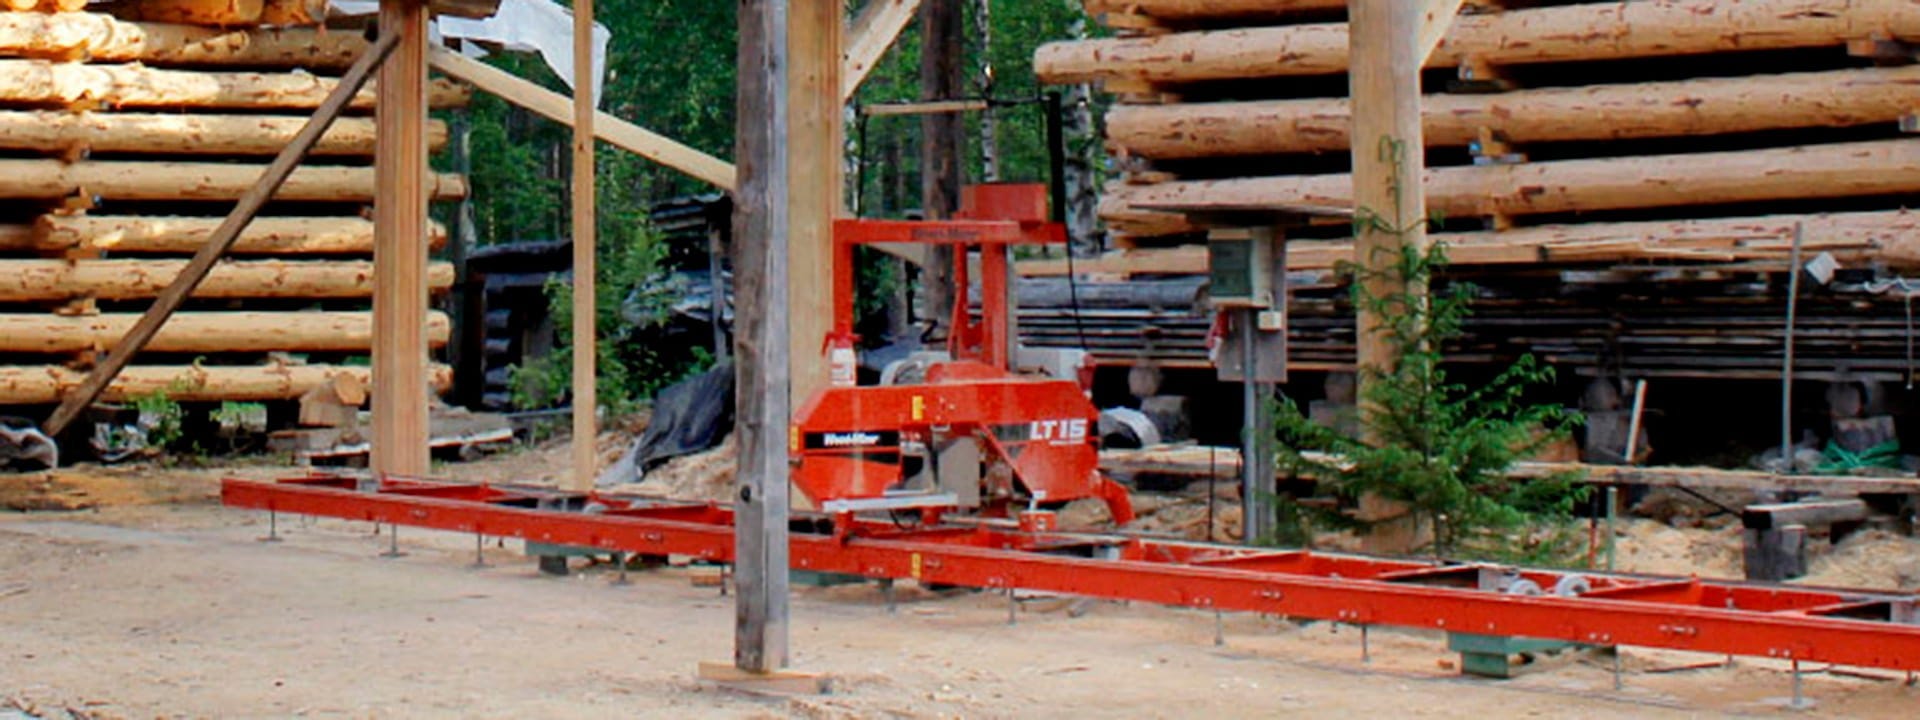 Log homes with LT15 sawmill in Finland